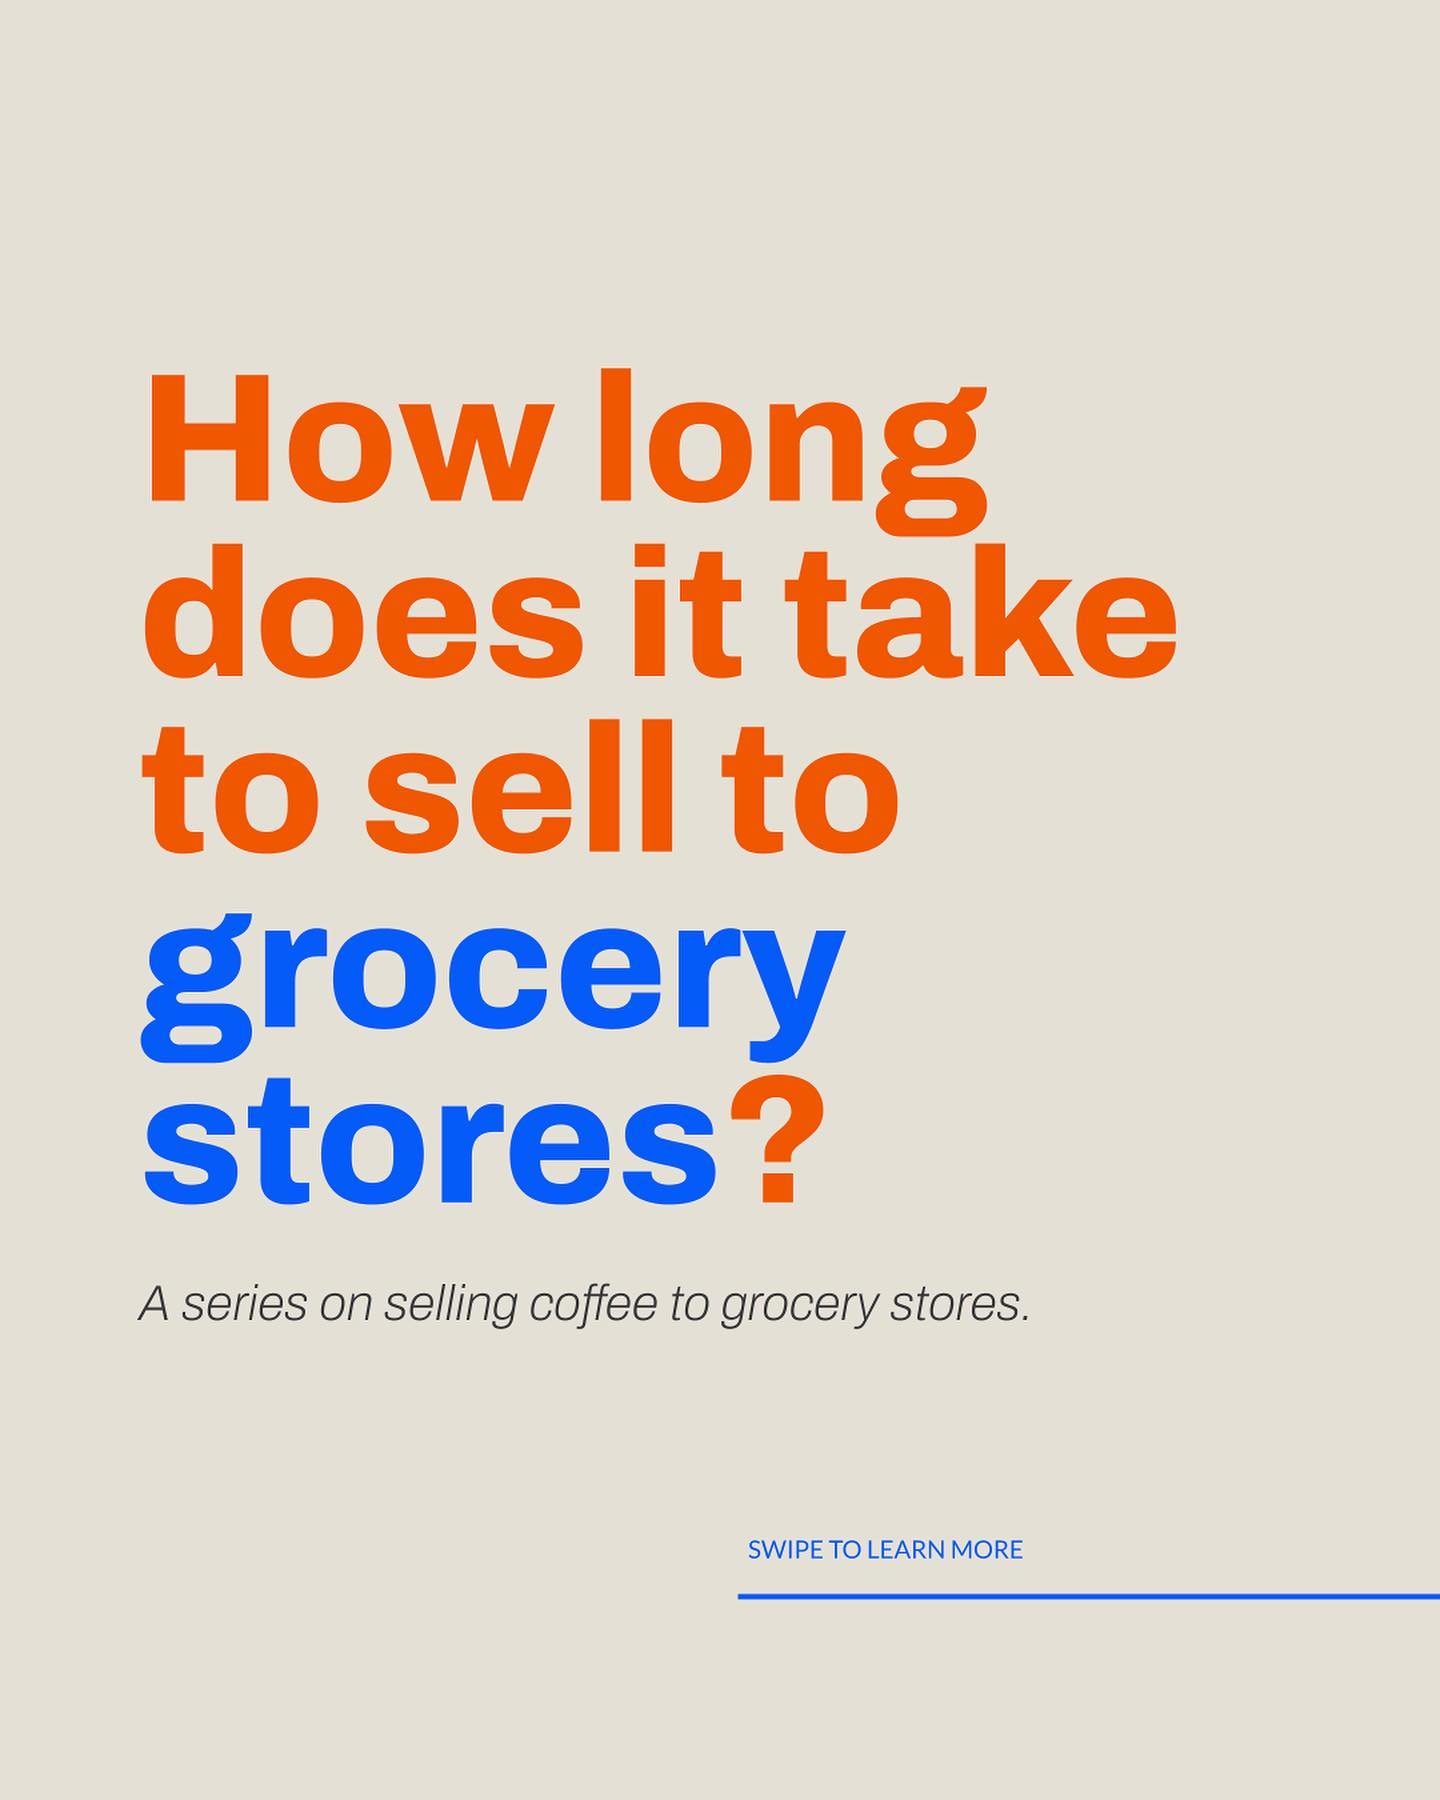 Often, grocery is seen as a holy grail for some roasters and for others it's the antithesis of success for other roasters.

I'm not here to say whether or not you should sell to grocery stores or not, but I am here to provide some more context as to 